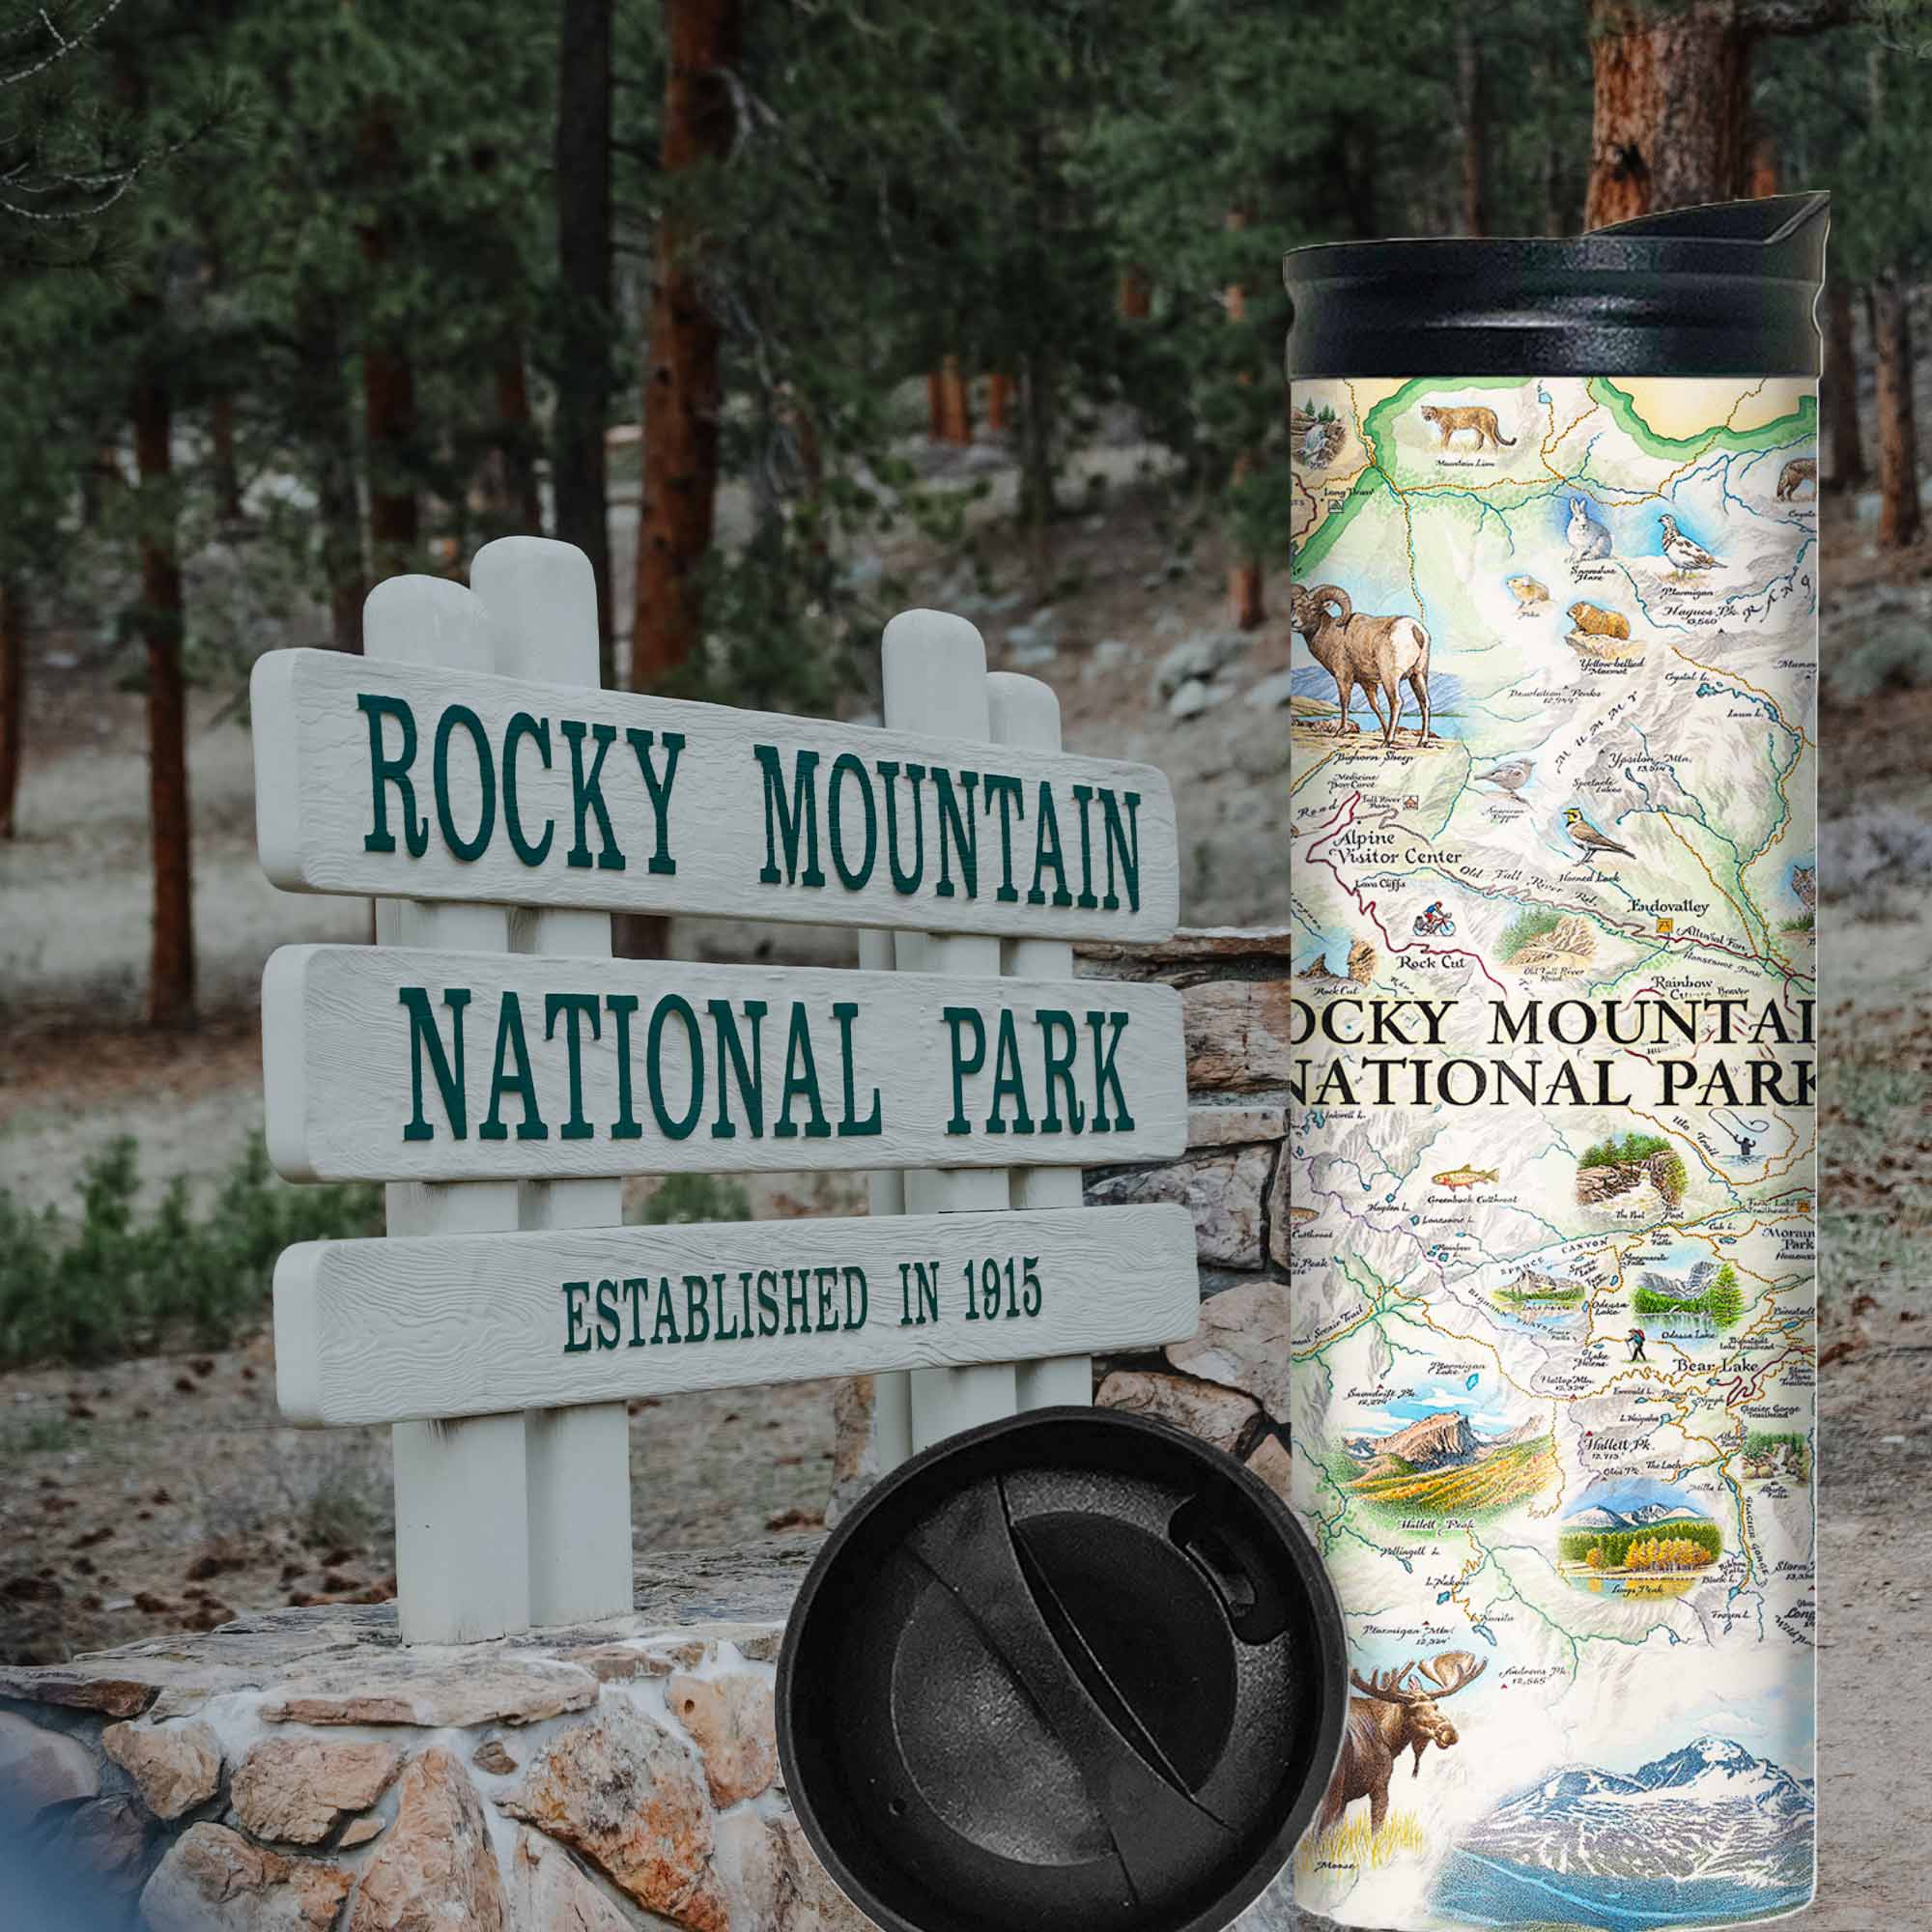 Rocky Mountain National Park Map 16 oz Travel Bottle. In the background is the Rocky Mountain National Park Sign with pine trees by it. The map features illustrations of places like Trail Ridge Road, Mount Ganby, Estes Park, and the Alpine Visitor Center. Flora and fauna include bobcats, snowshoe hares, Indian paintbrushes, and wild roses. 